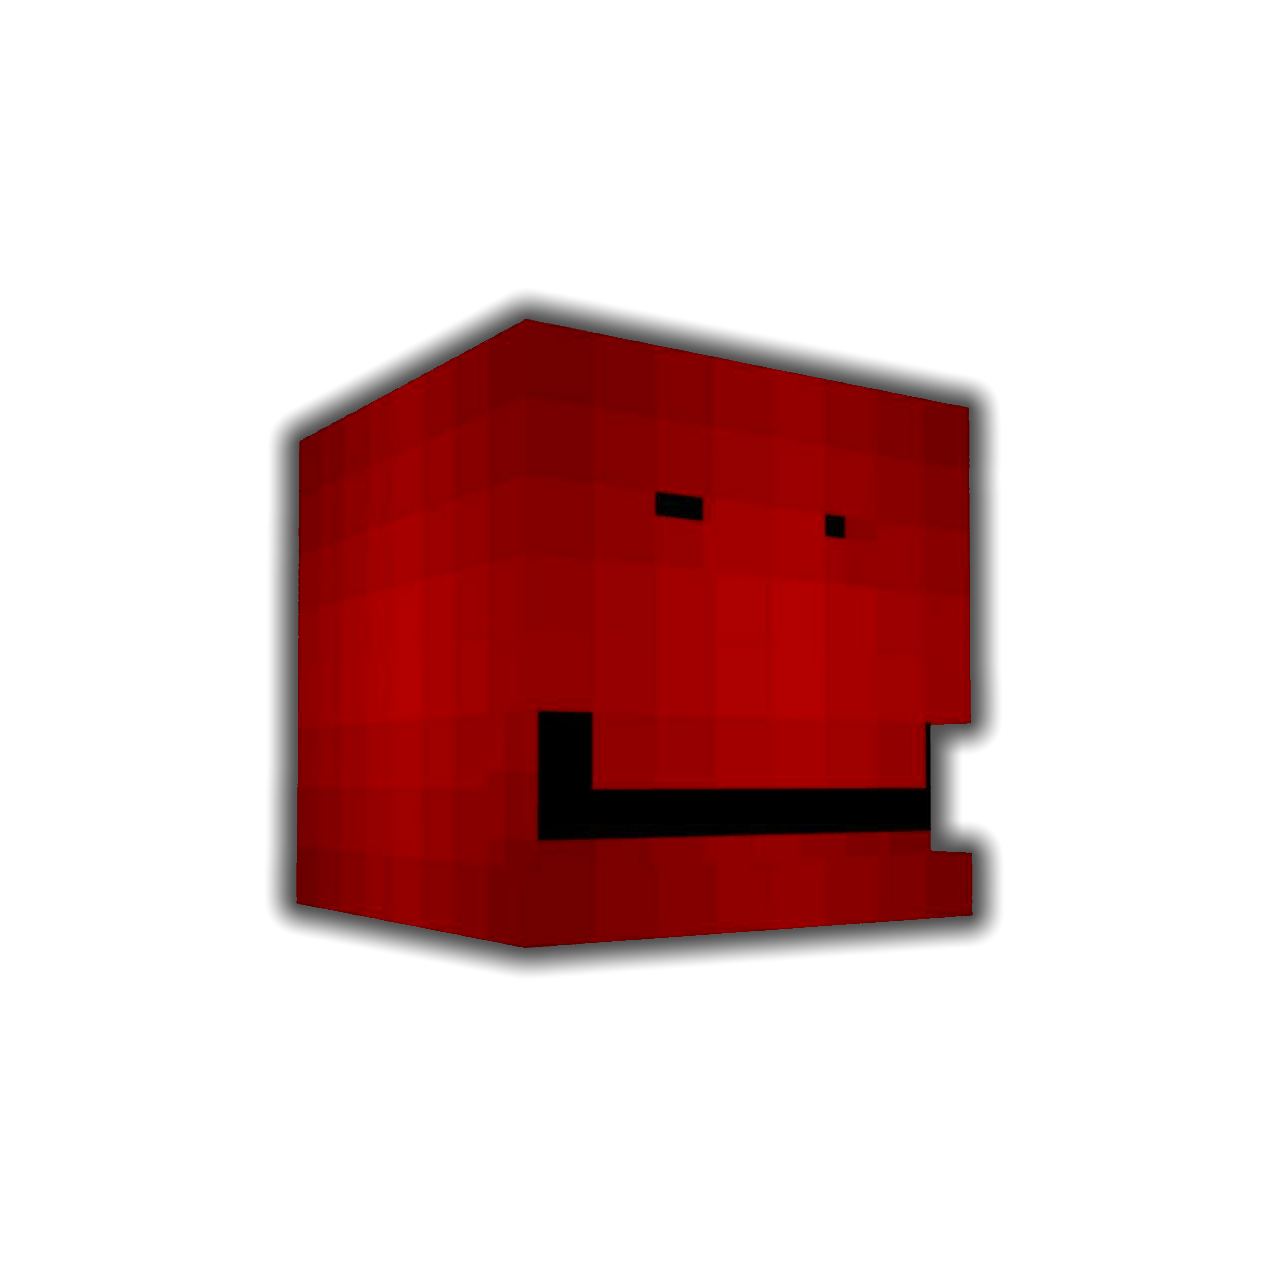 Cremon's Profile Picture on PvPRP